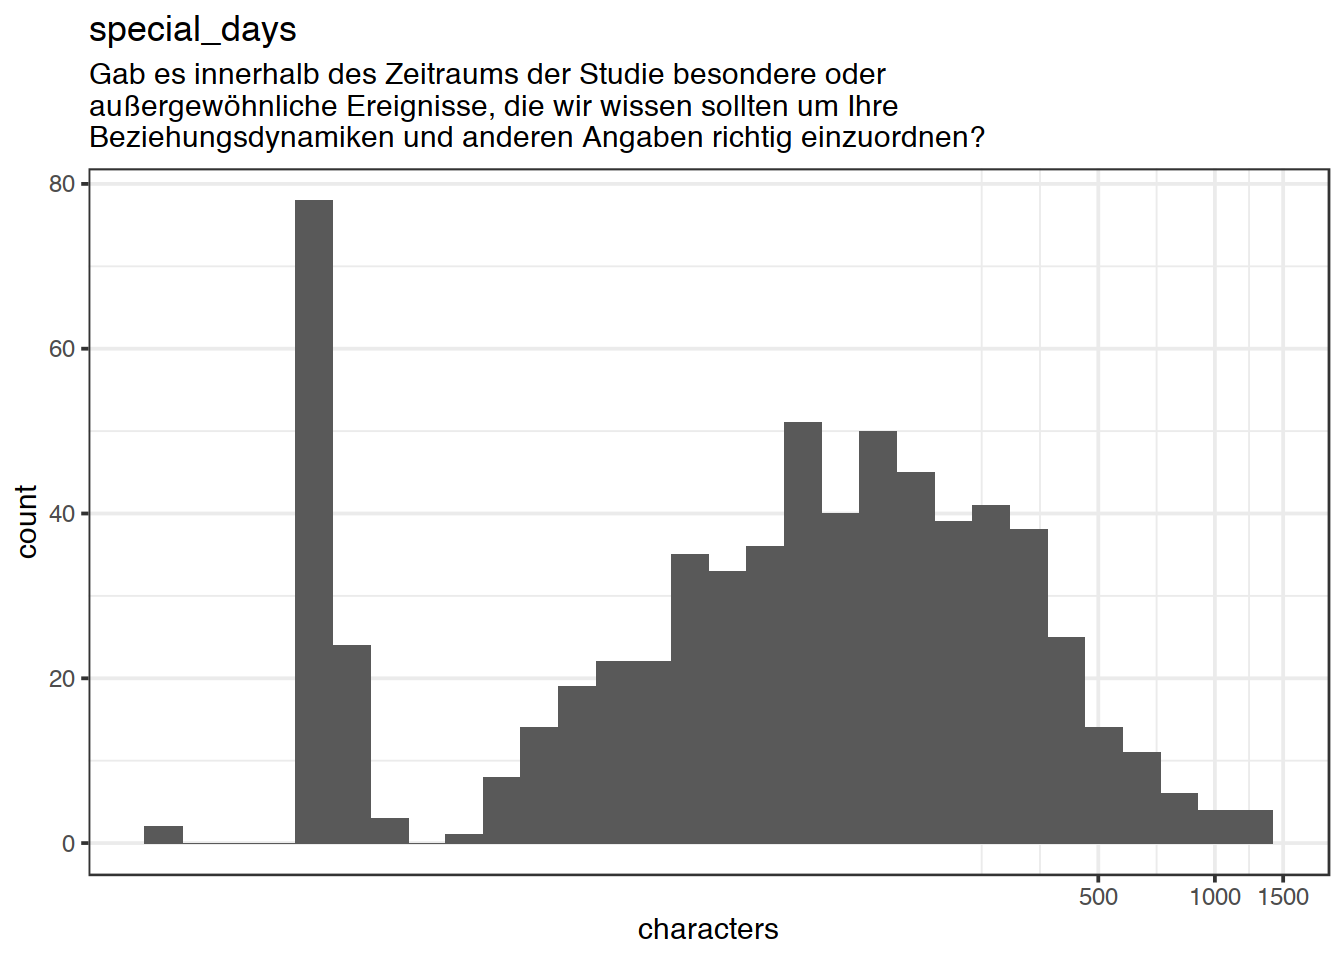 Distribution of values for special_days